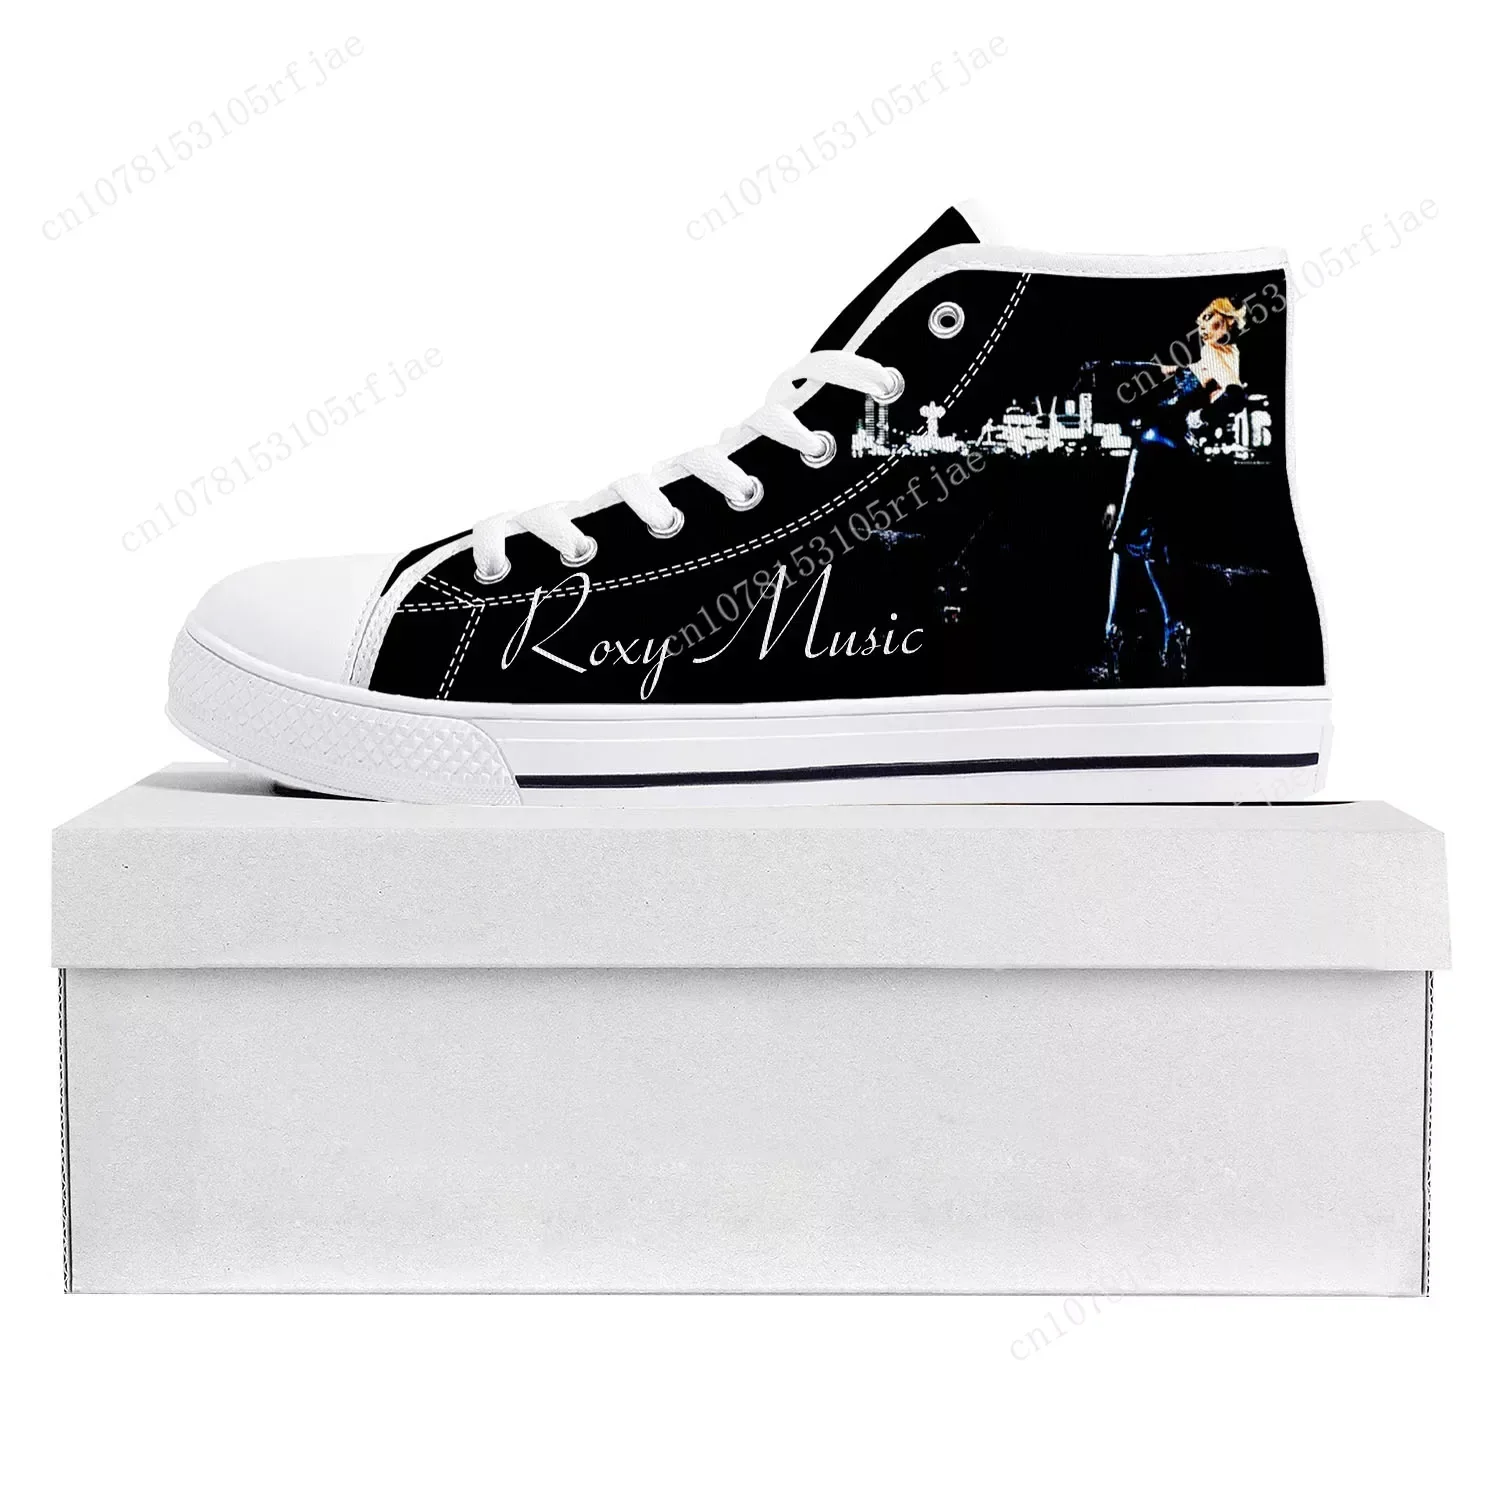 

Roxy Music Metal Rock Band High Top High Quality Sneakers Mens Womens Teenager Canvas Sneaker Casual Couple Shoes Custom Shoe